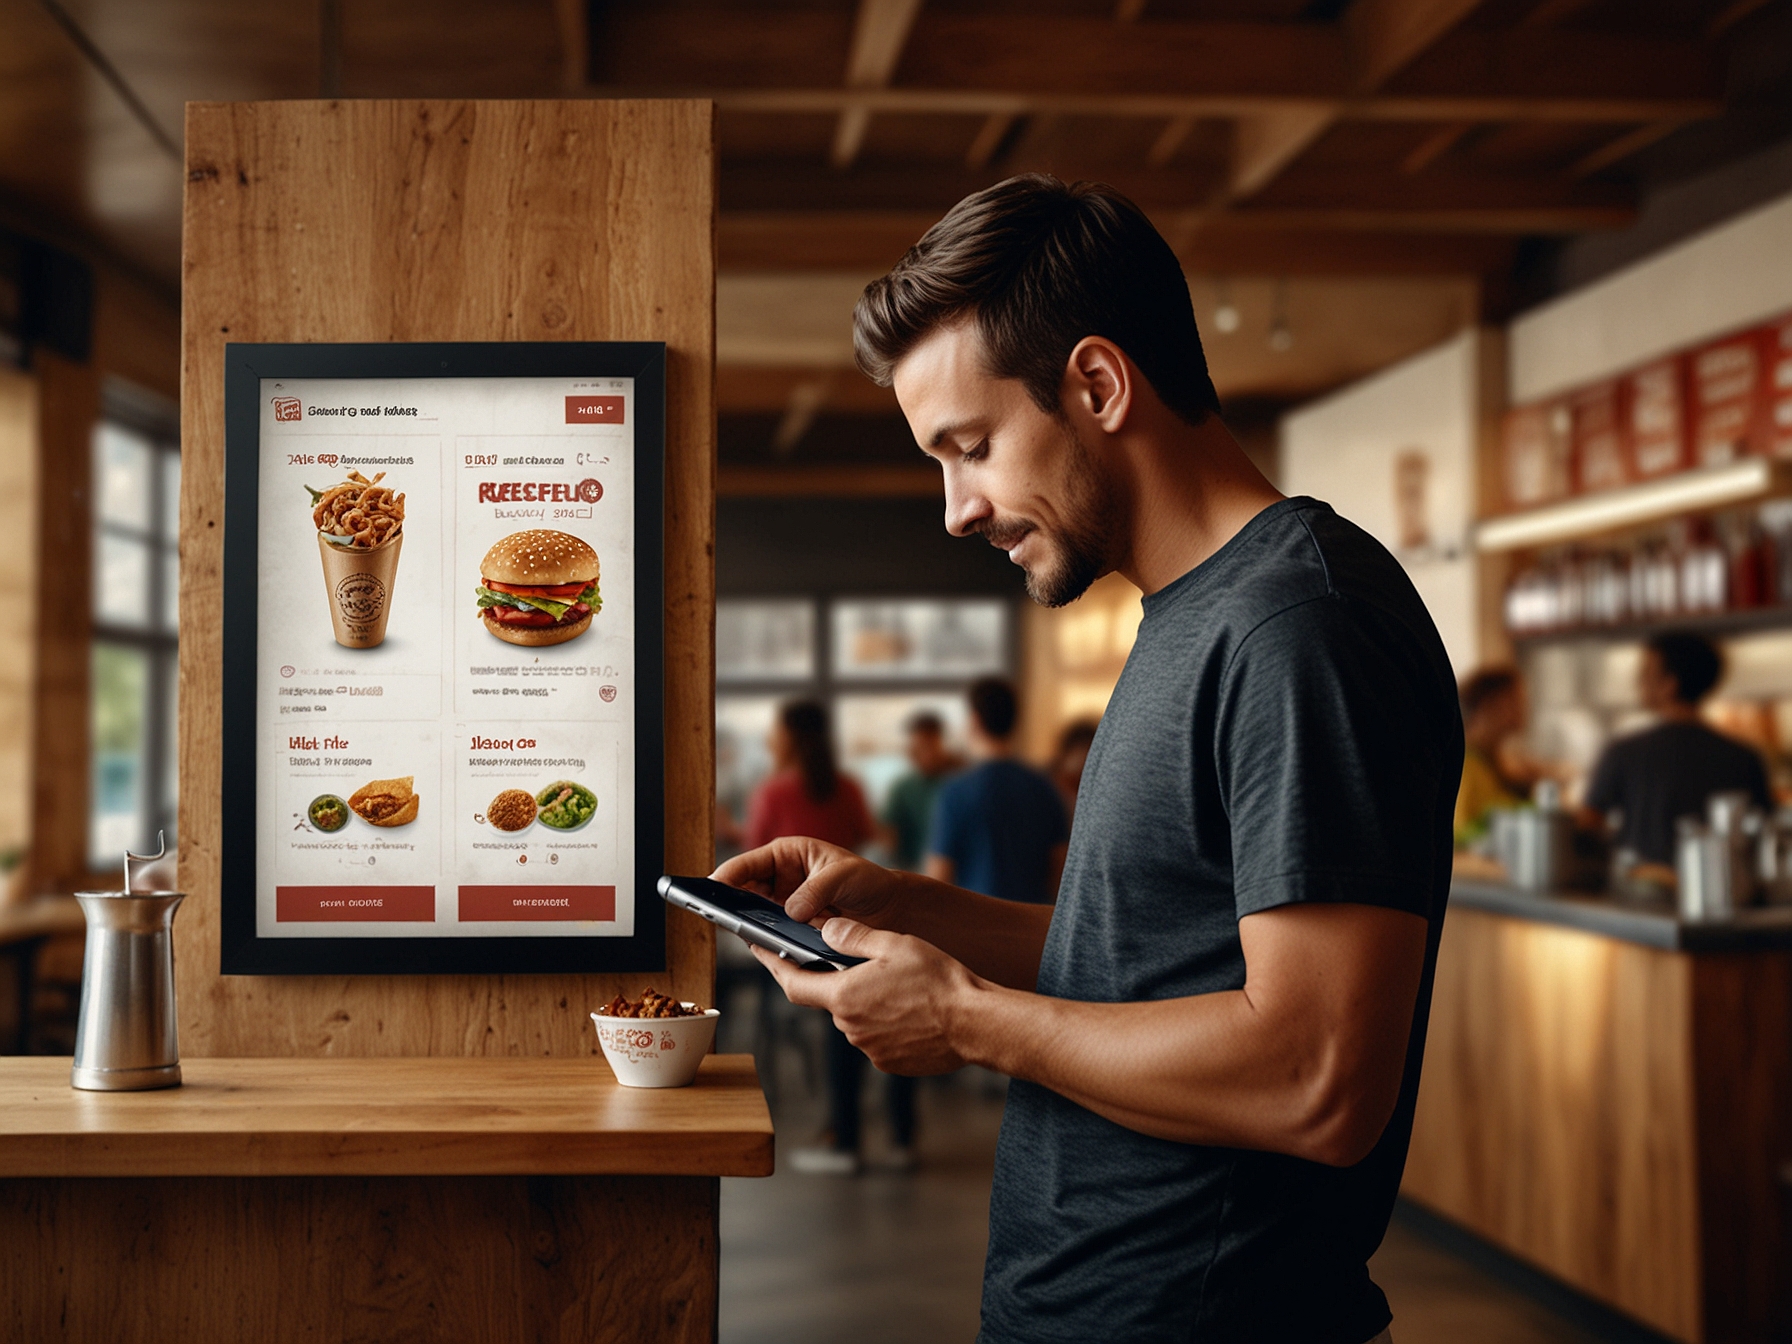 A digital menu board and a customer using a mobile app to order Chipotle, highlighting the company's investment in technology and digital ordering platforms.